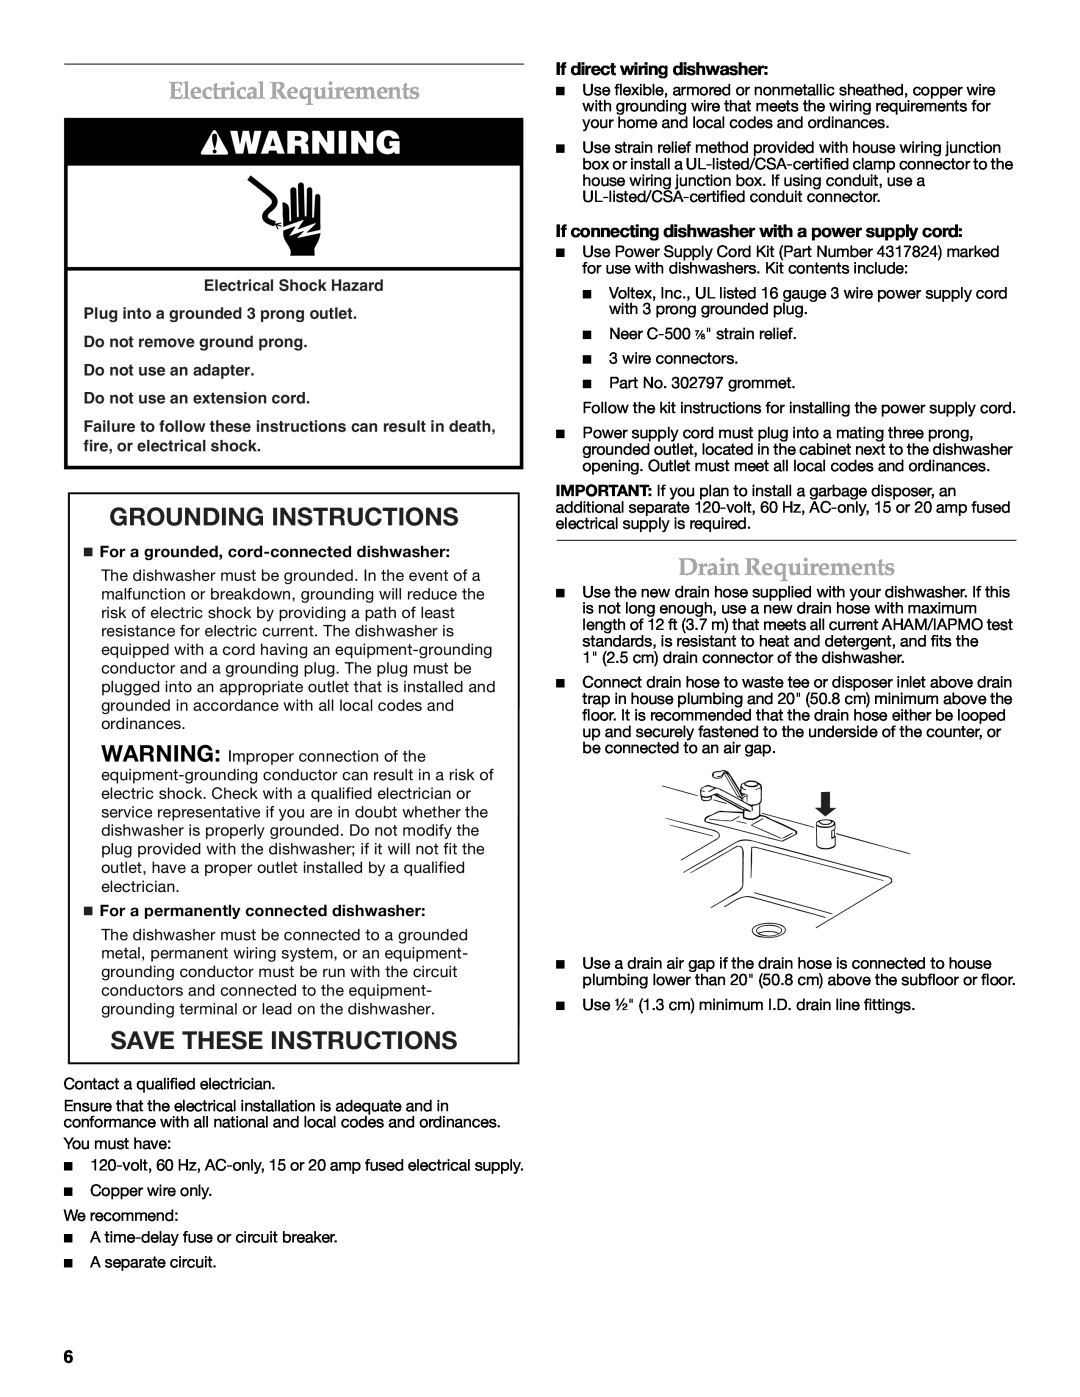 KitchenAid W10216167A Electrical Requirements, Grounding Instructions, Save These Instructions, Drain Requirements 